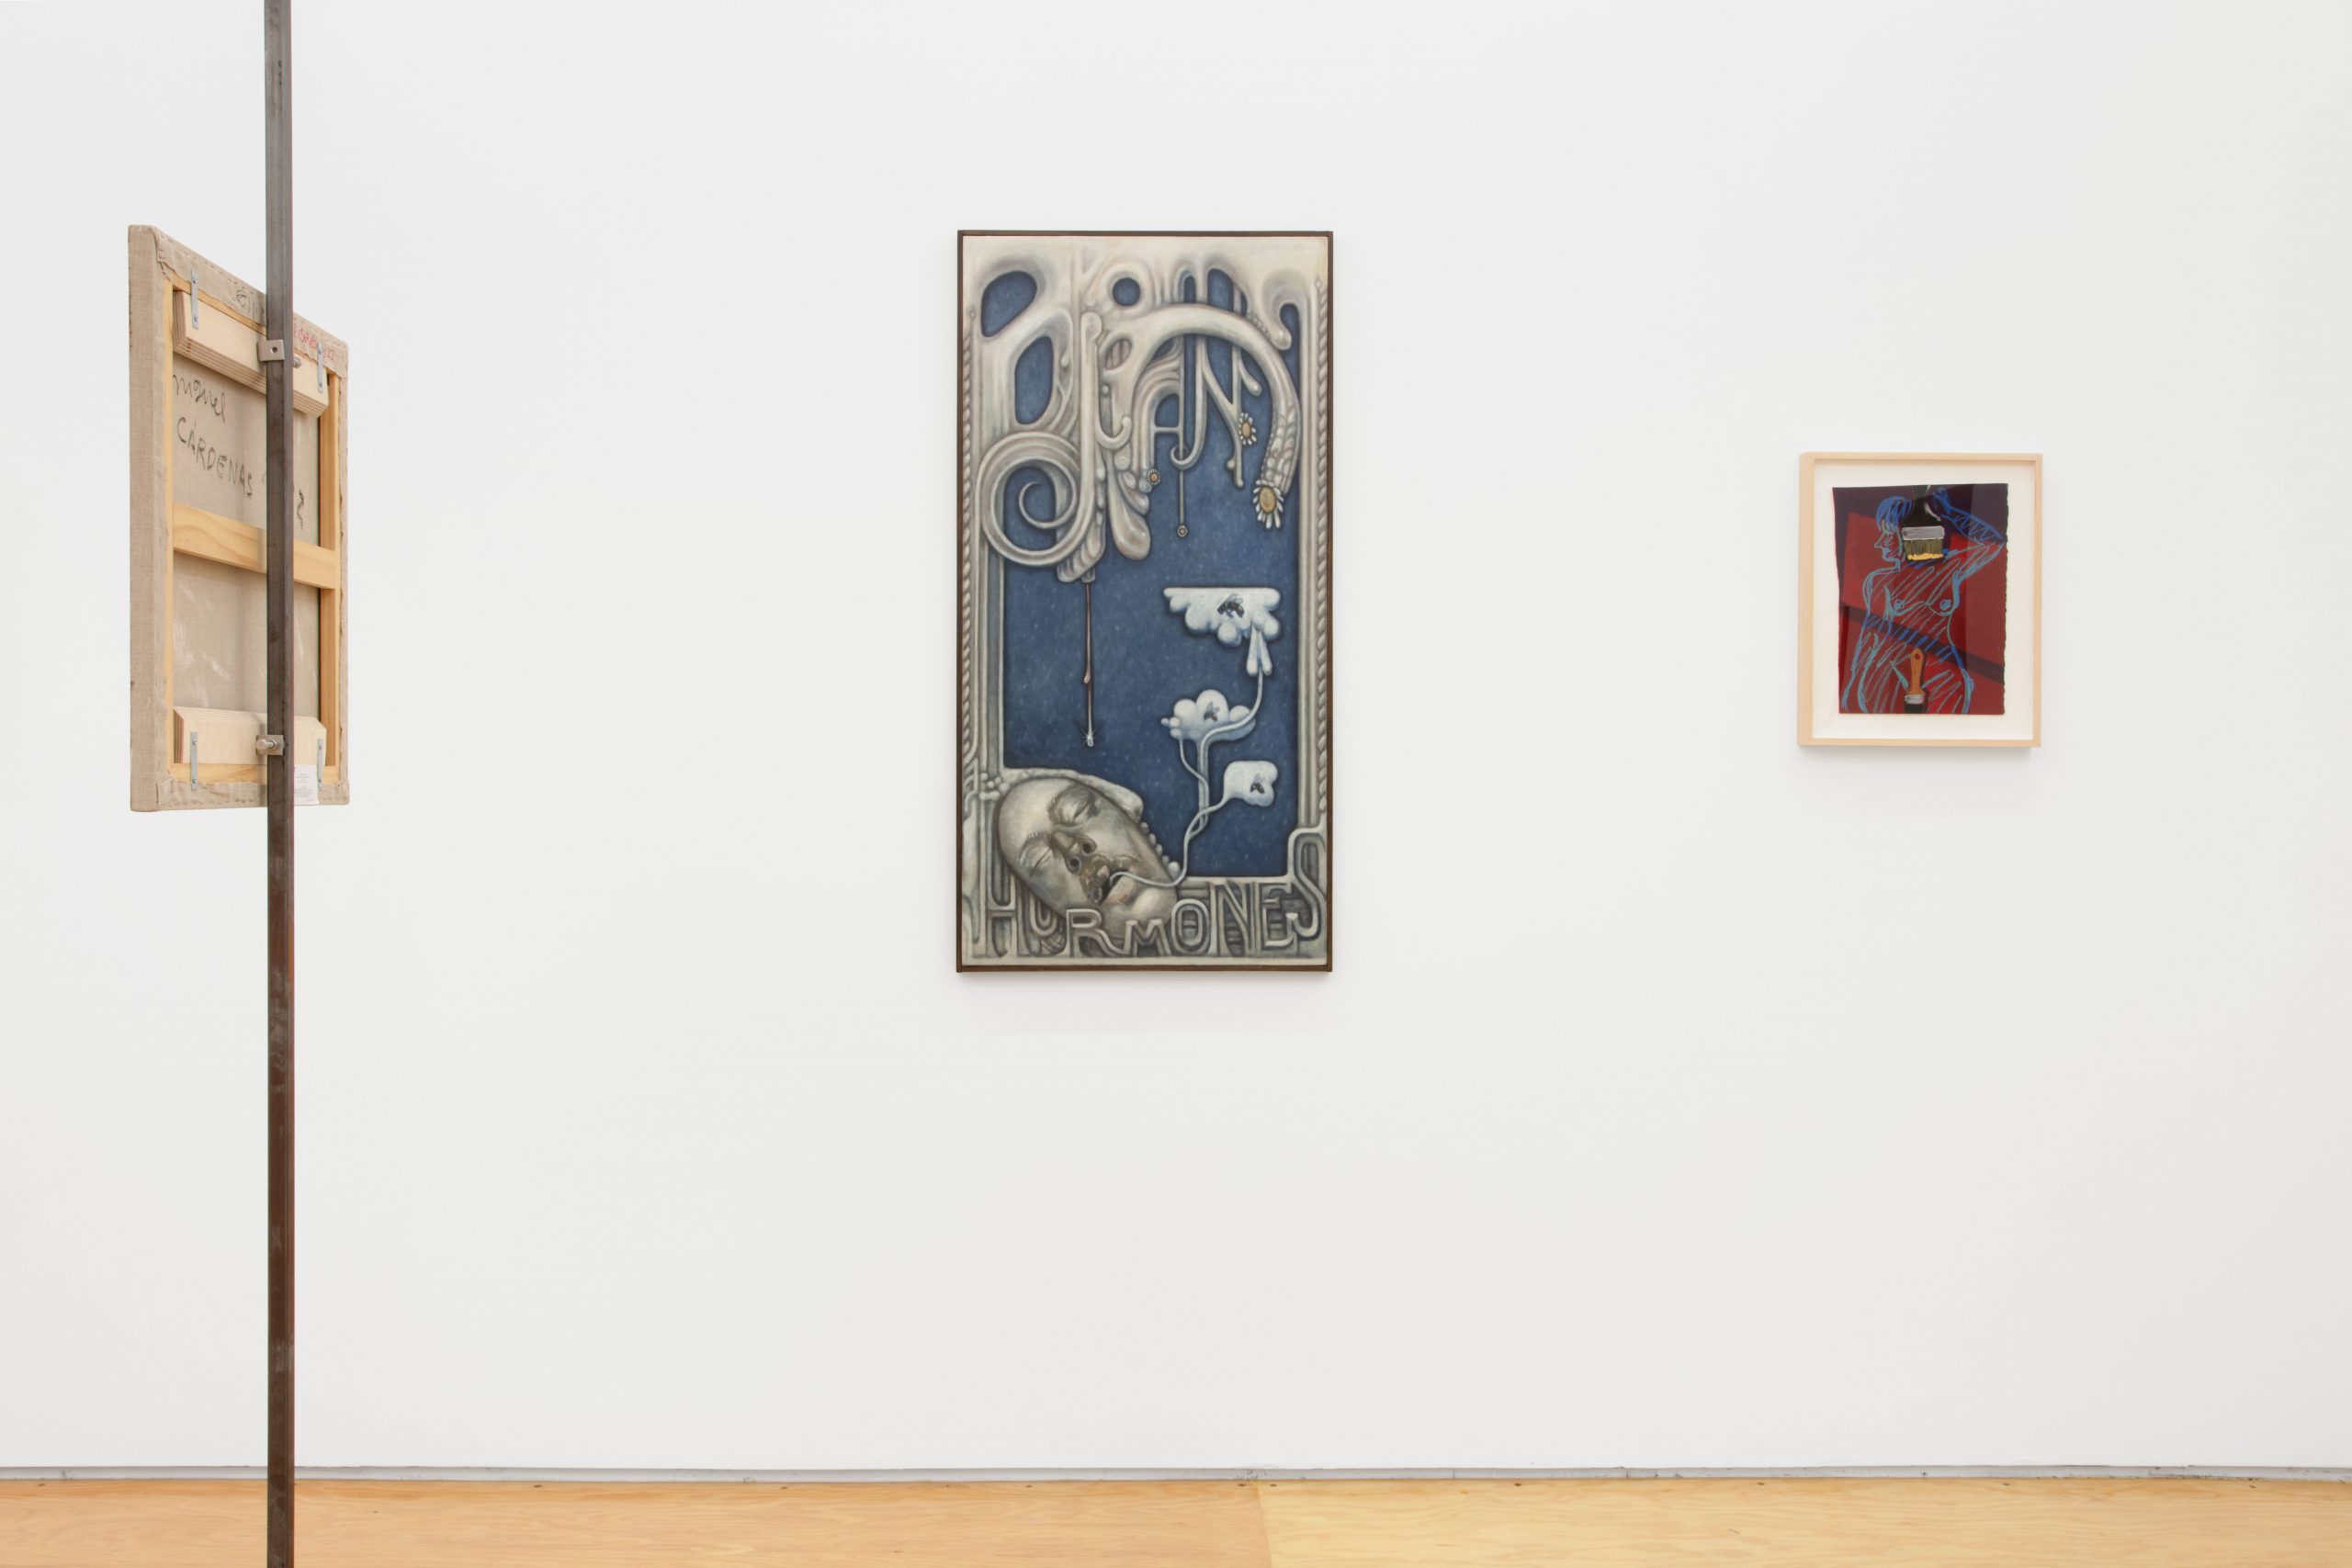 Installation view with three paintings